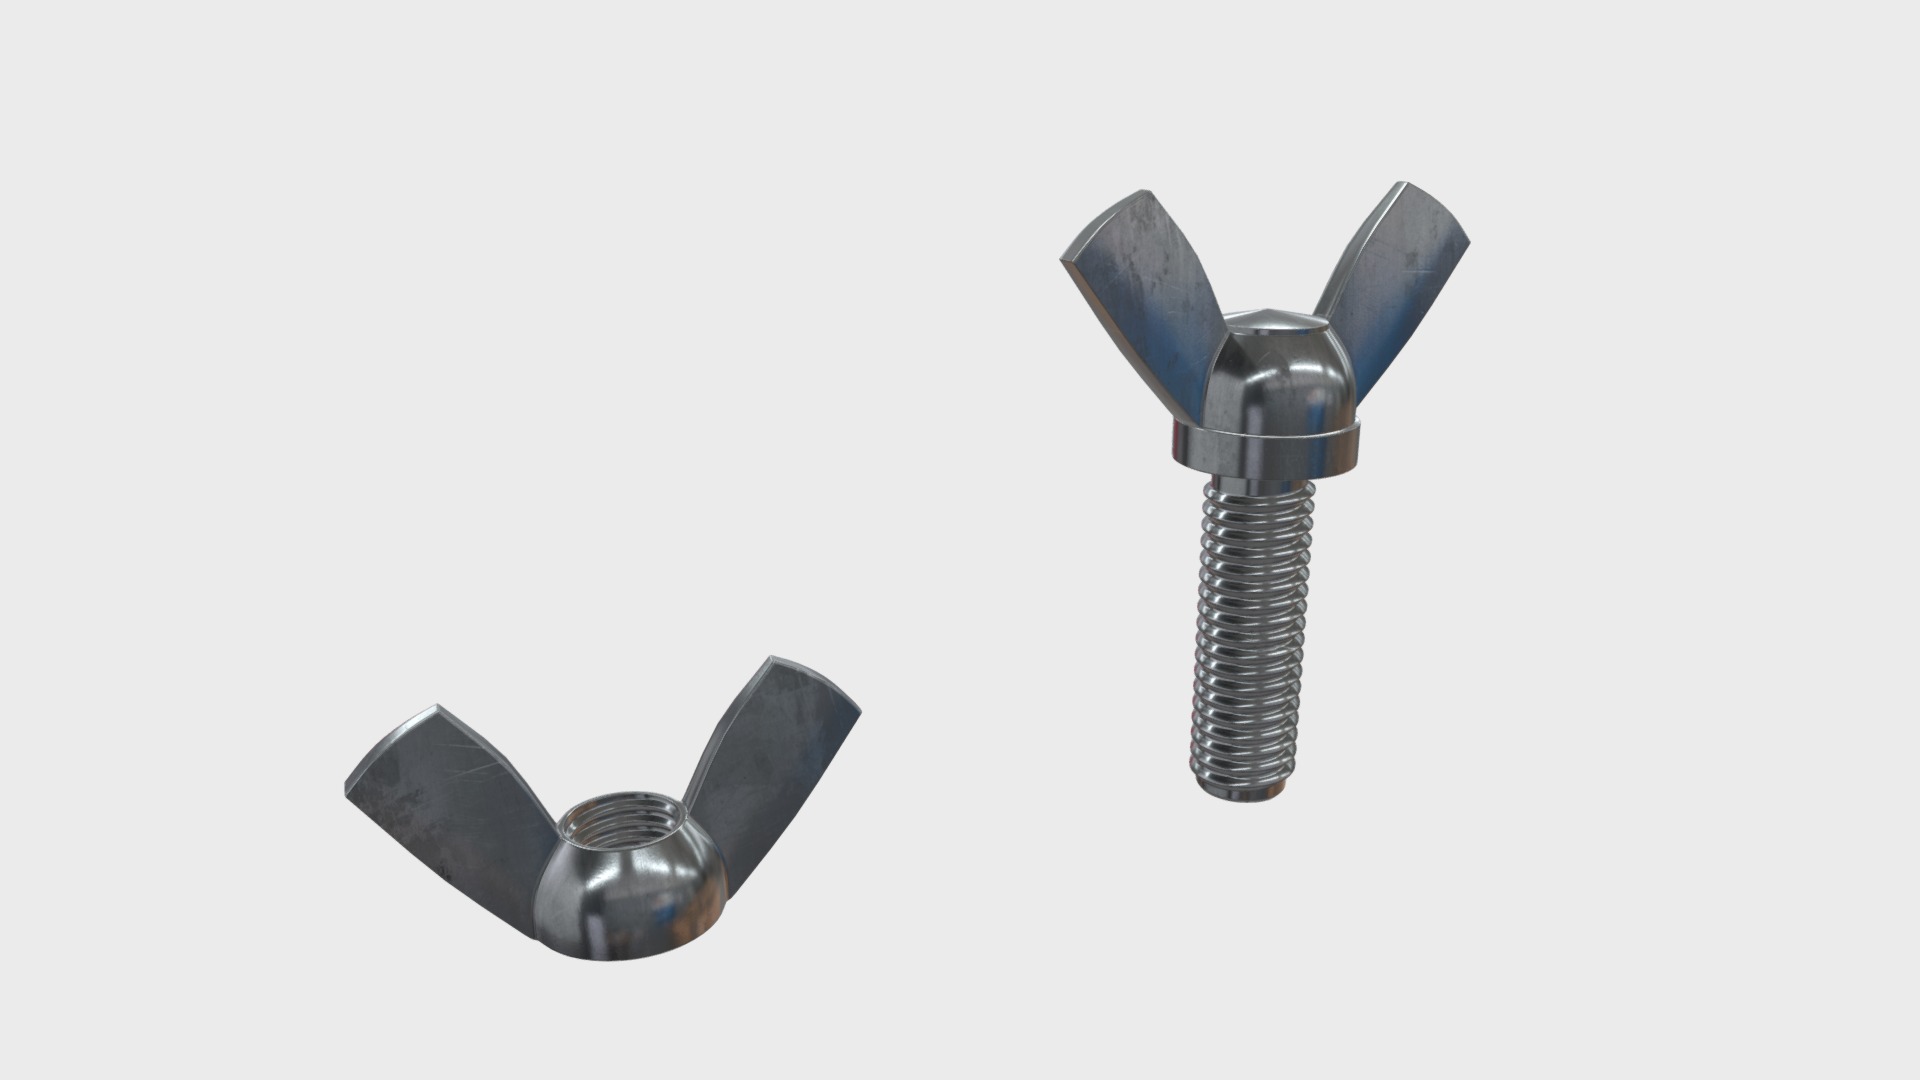 3D model Wing nut and screw - This is a 3D model of the Wing nut and screw. The 3D model is about a couple of black and silver propeller blades.